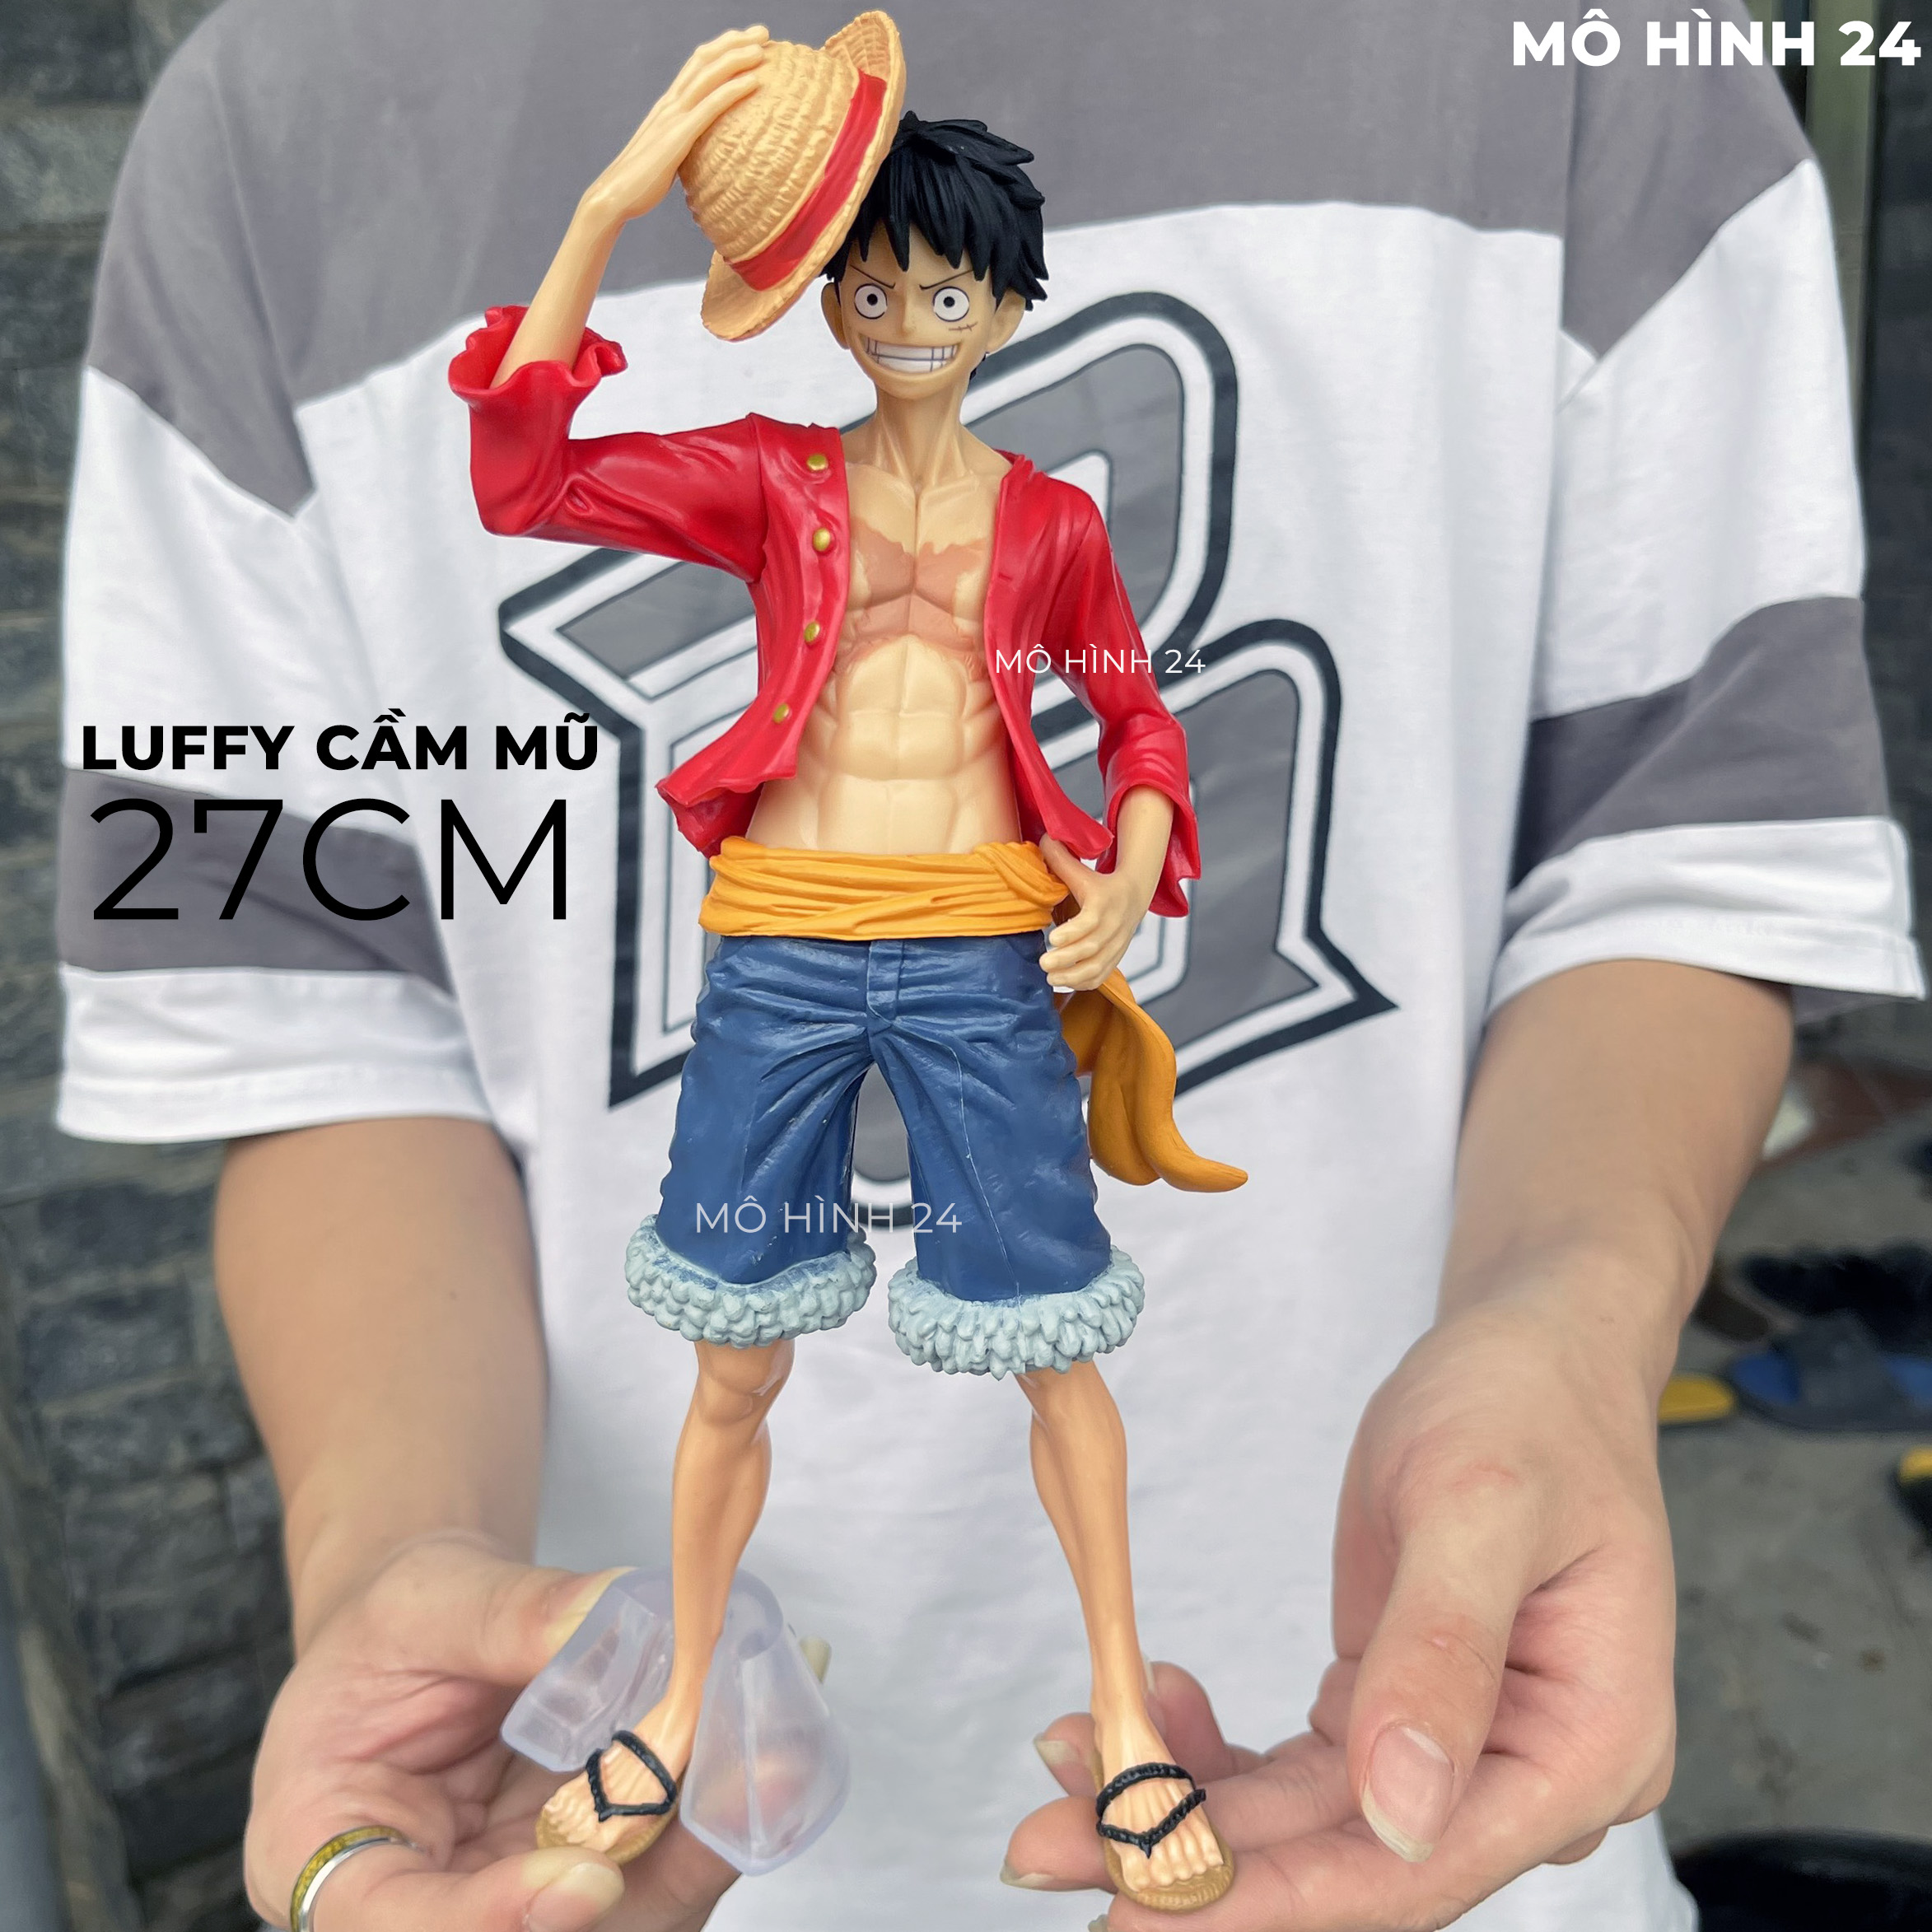 Cheap pirate king 27cm Luffy monkey D Luffy figure one piece basic red